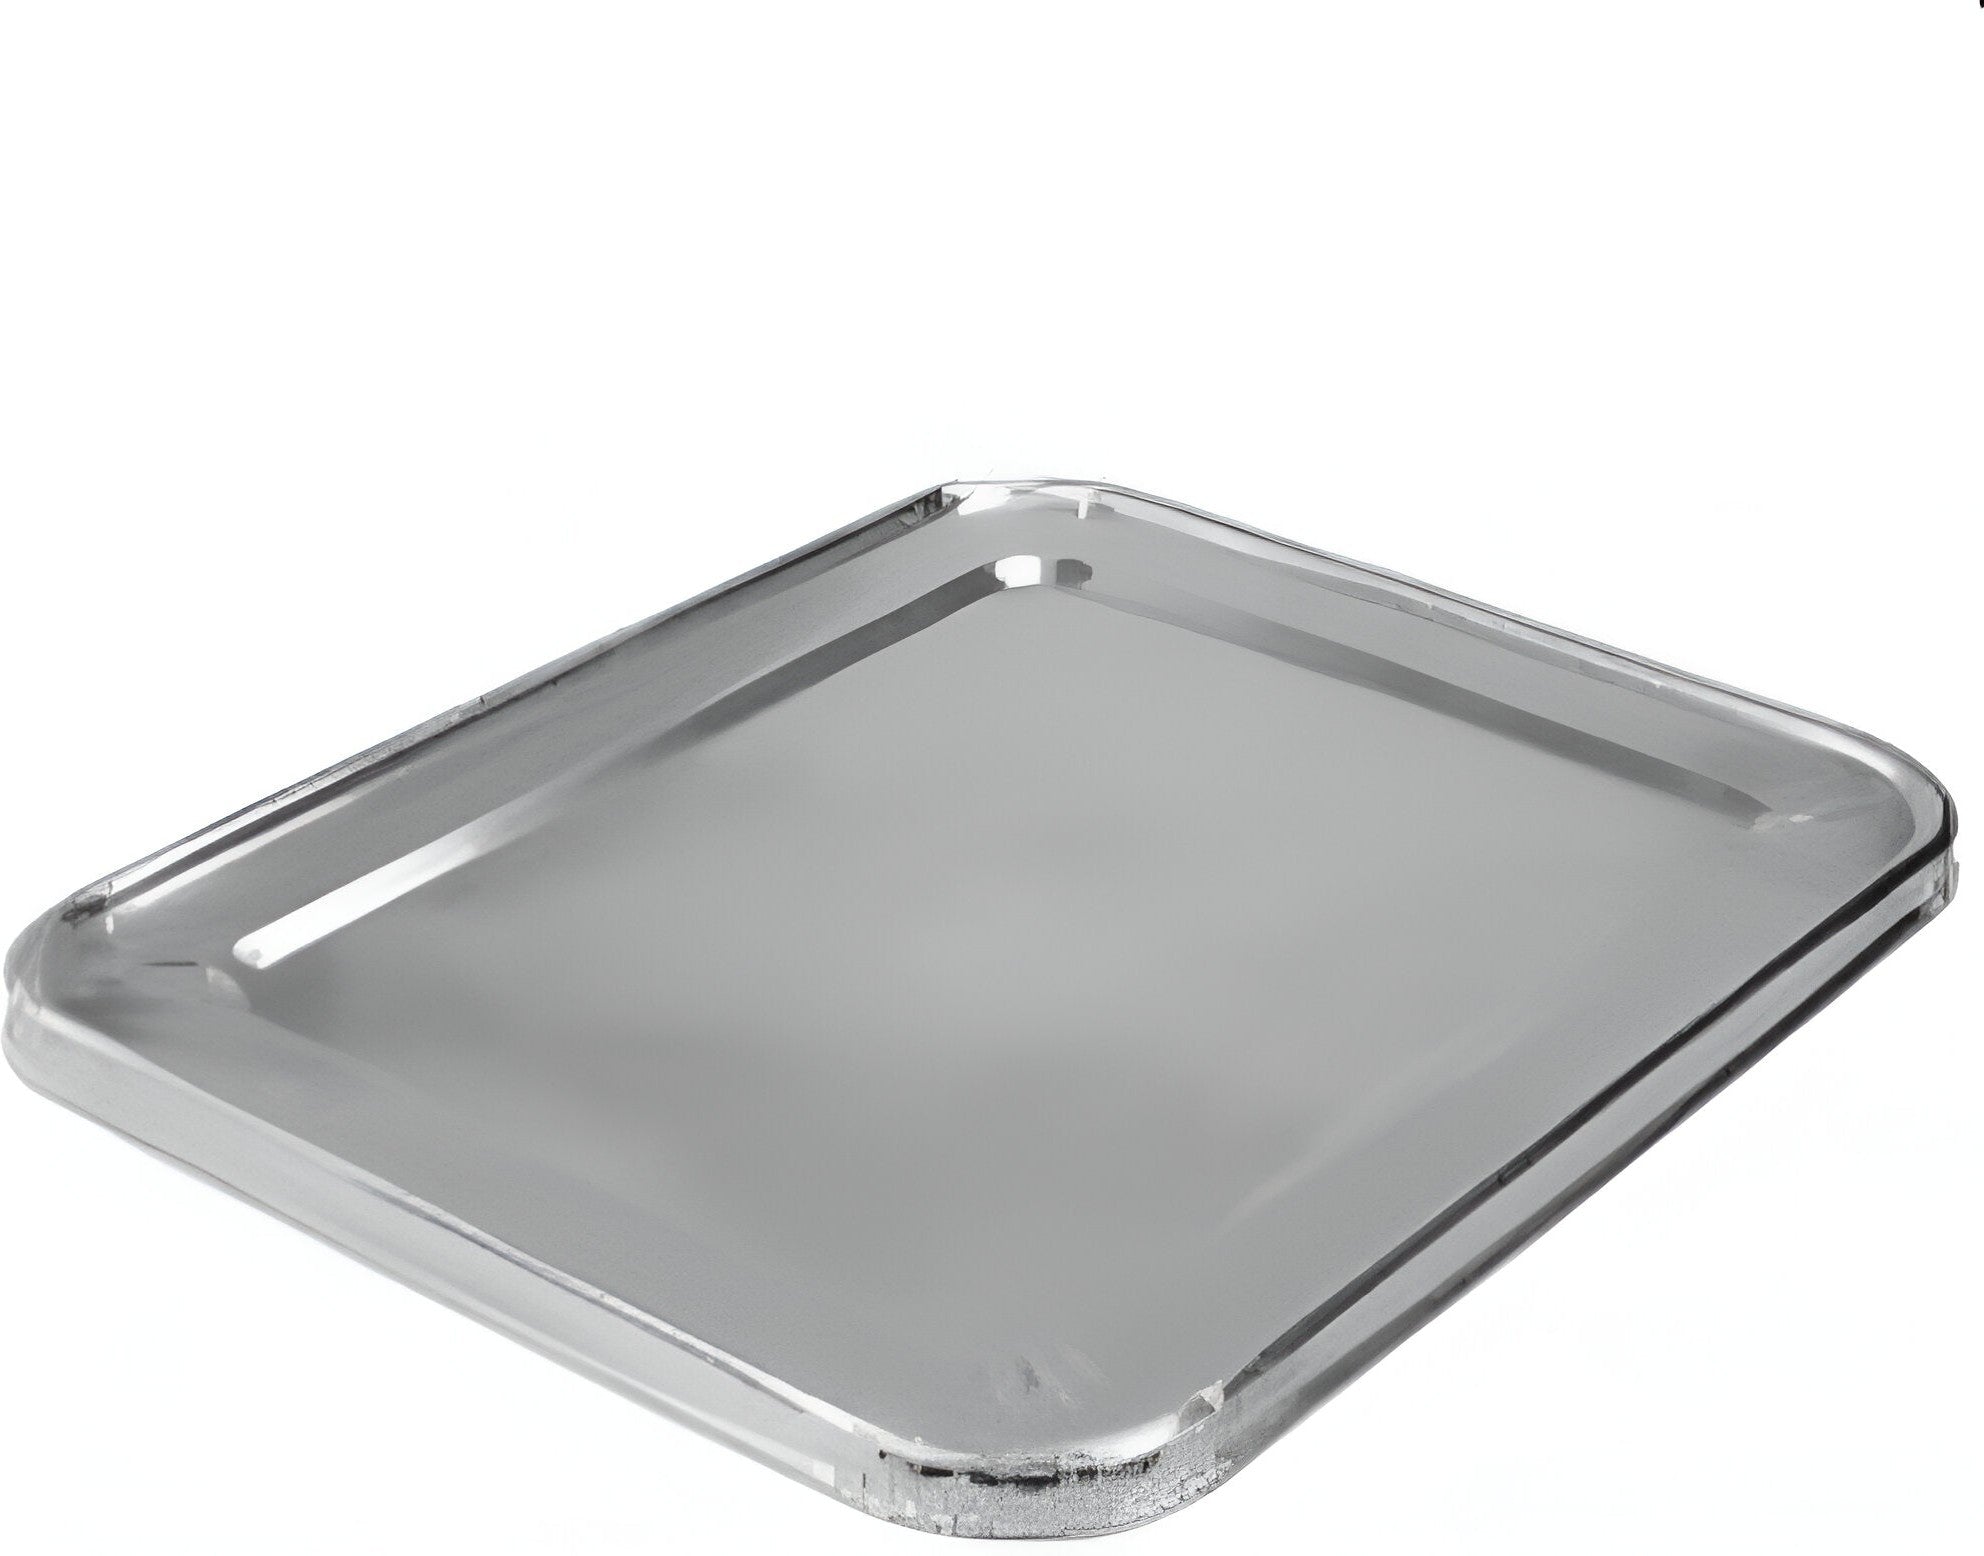 HFA - 45 Gauge Foil Lid Fits For Full Steam Table Foil Containers, 50/Cs - 2050-50-50FC